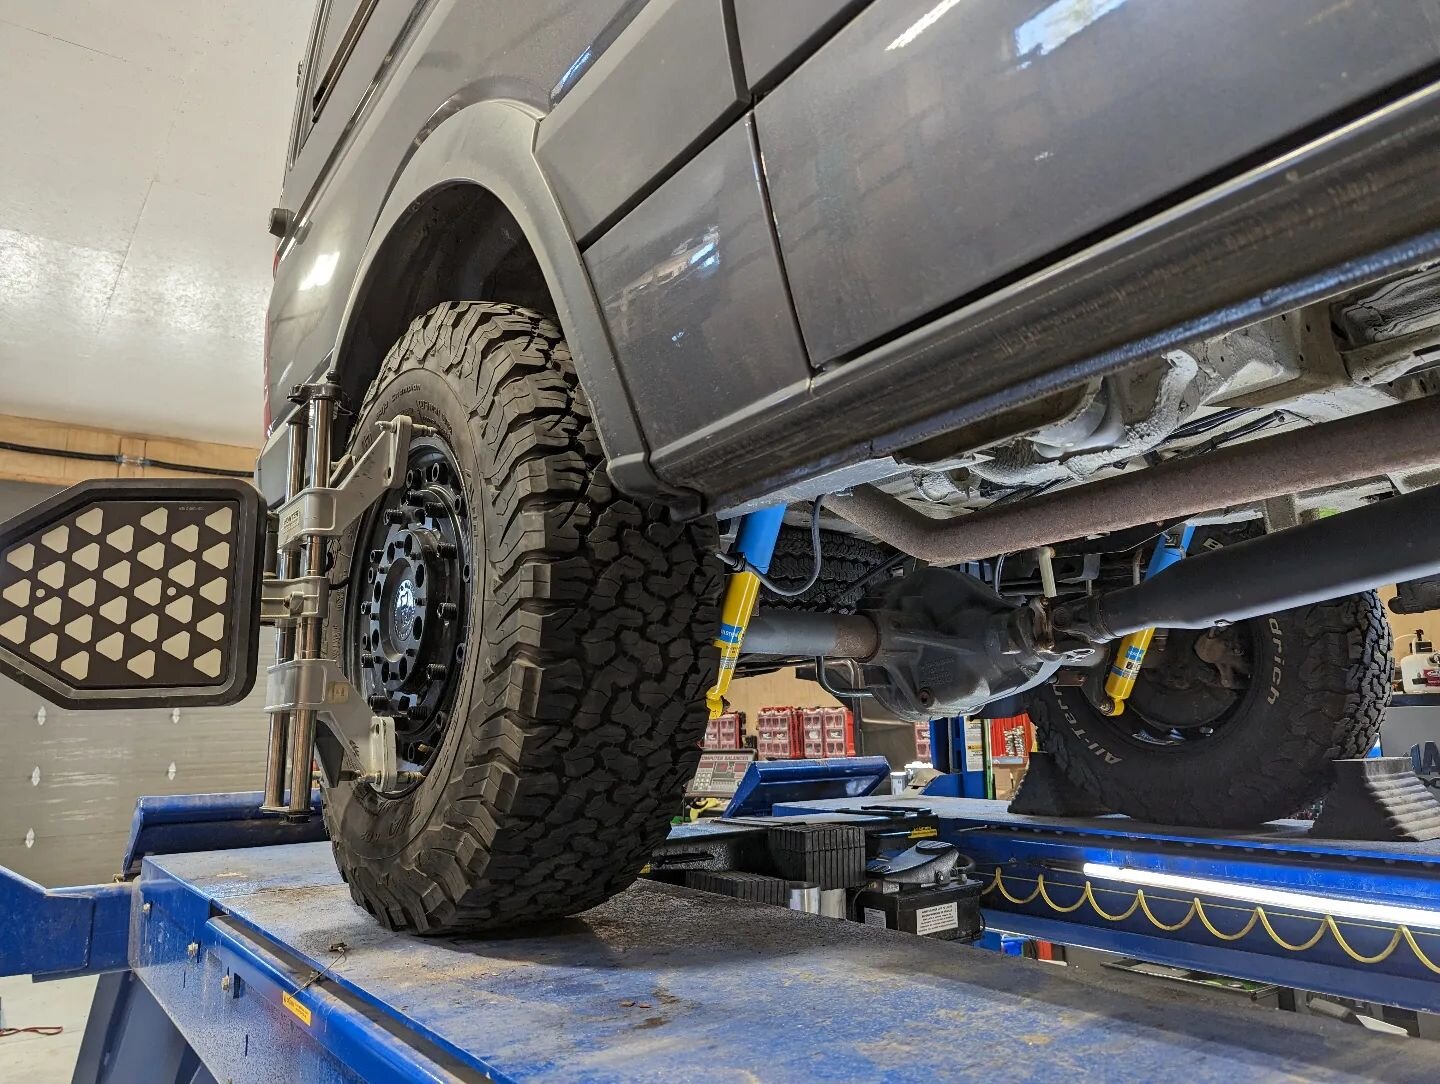 Suspension Upgrades and Four Wheel Alignment. Pretty sure Ray's first project on this van was back in 2018. Participating in the long term adVANtures, including maintenance, is really satisfying.